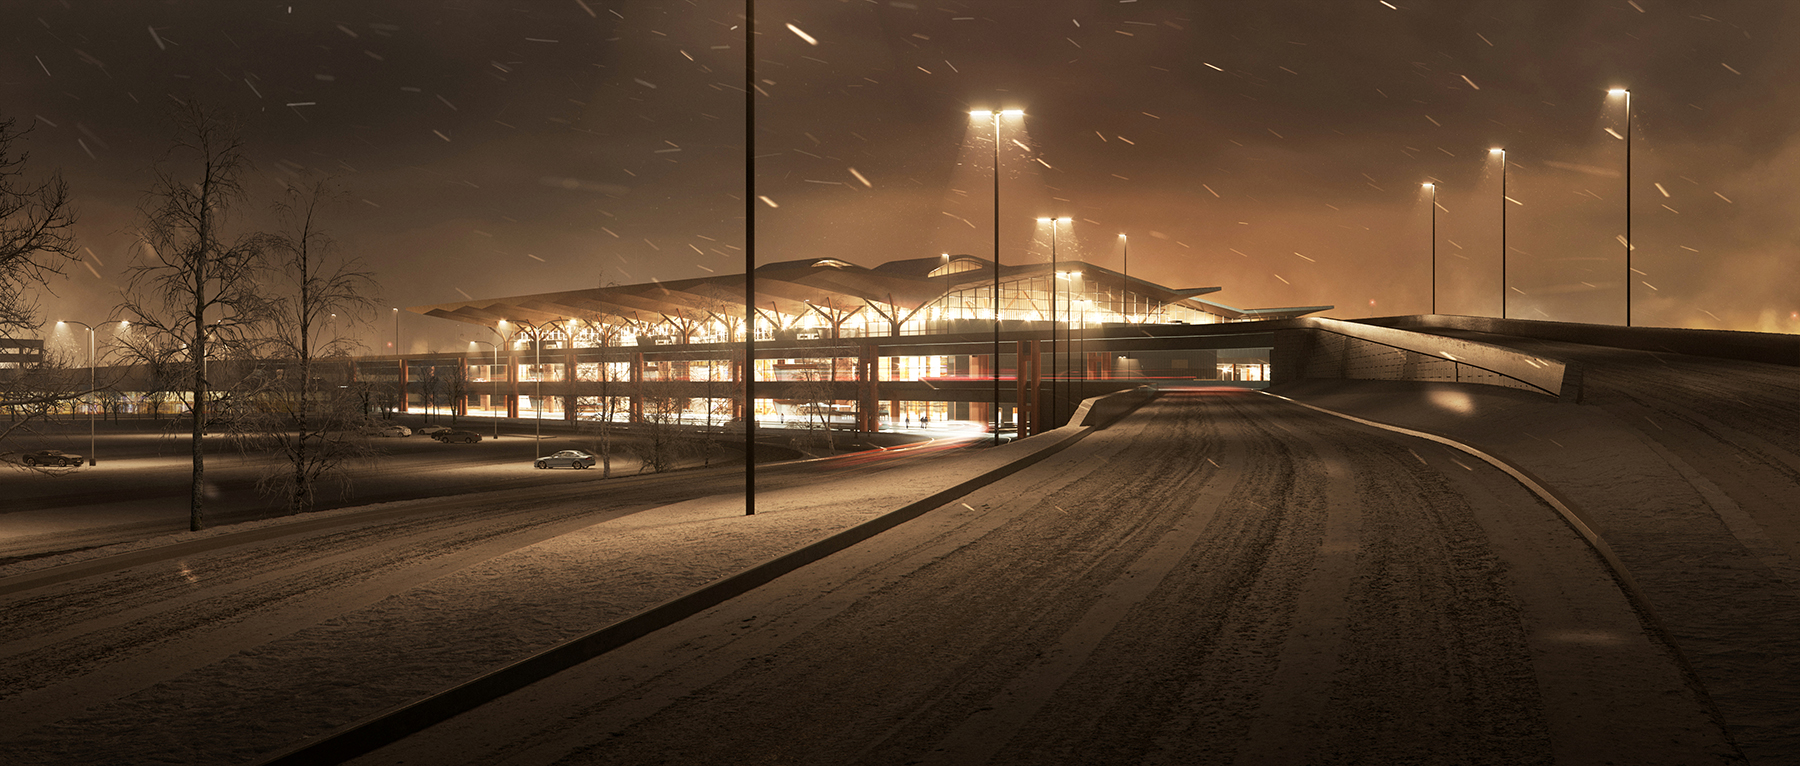 bridge and terminal in a snowstorm at night